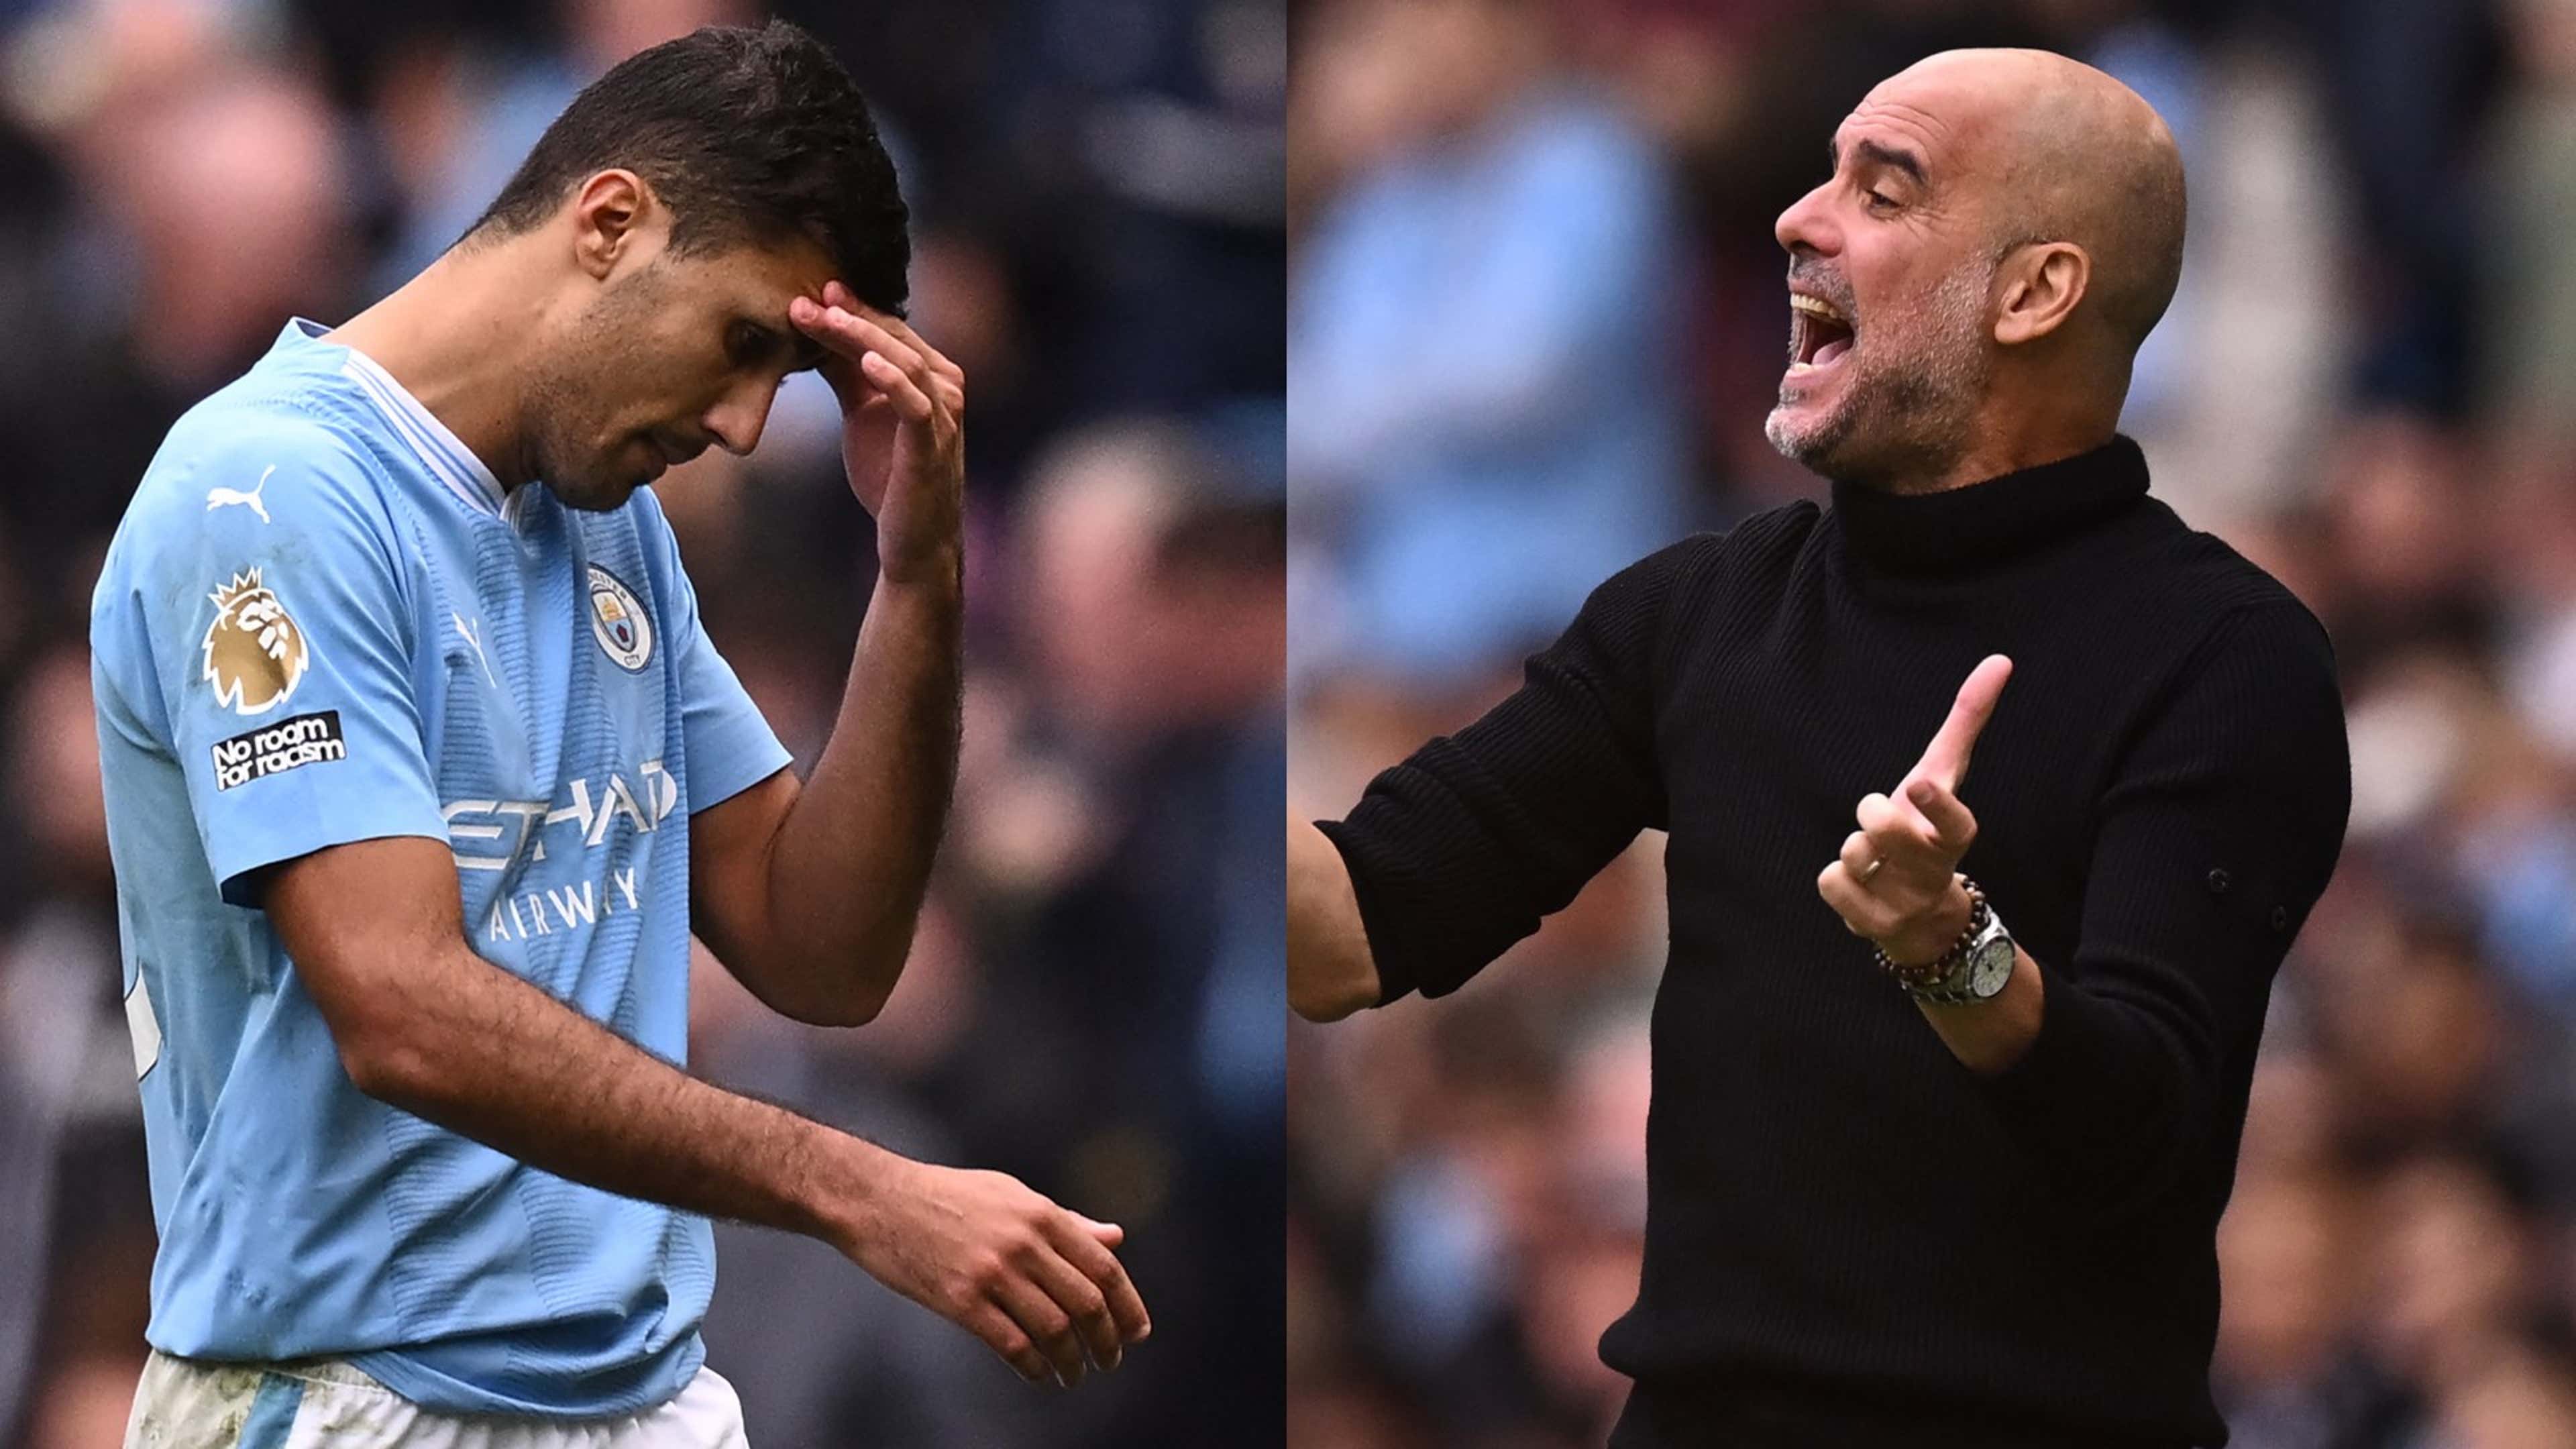 Control yourself!' - Angry Pep Guardiola fires Rodri warning after crazy  red card in Man City's win over Nottingham Forest | Goal.com